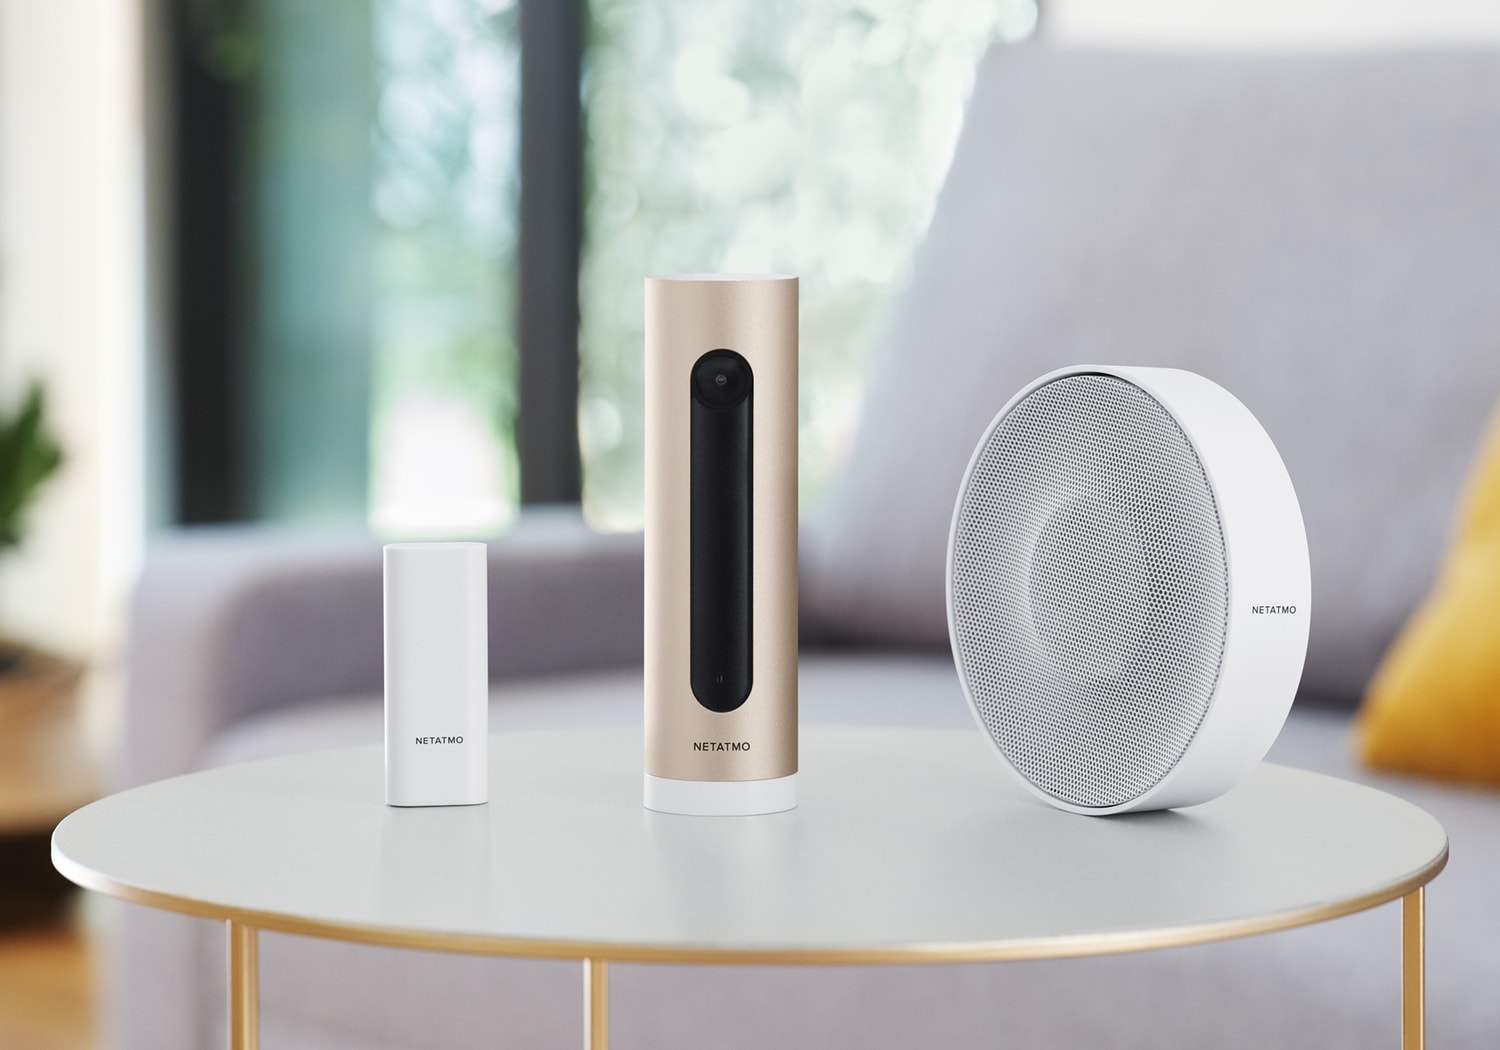 Netatmo adds support for Apple's HomeKit Secure Video standard to its Smart Indoor Camera.